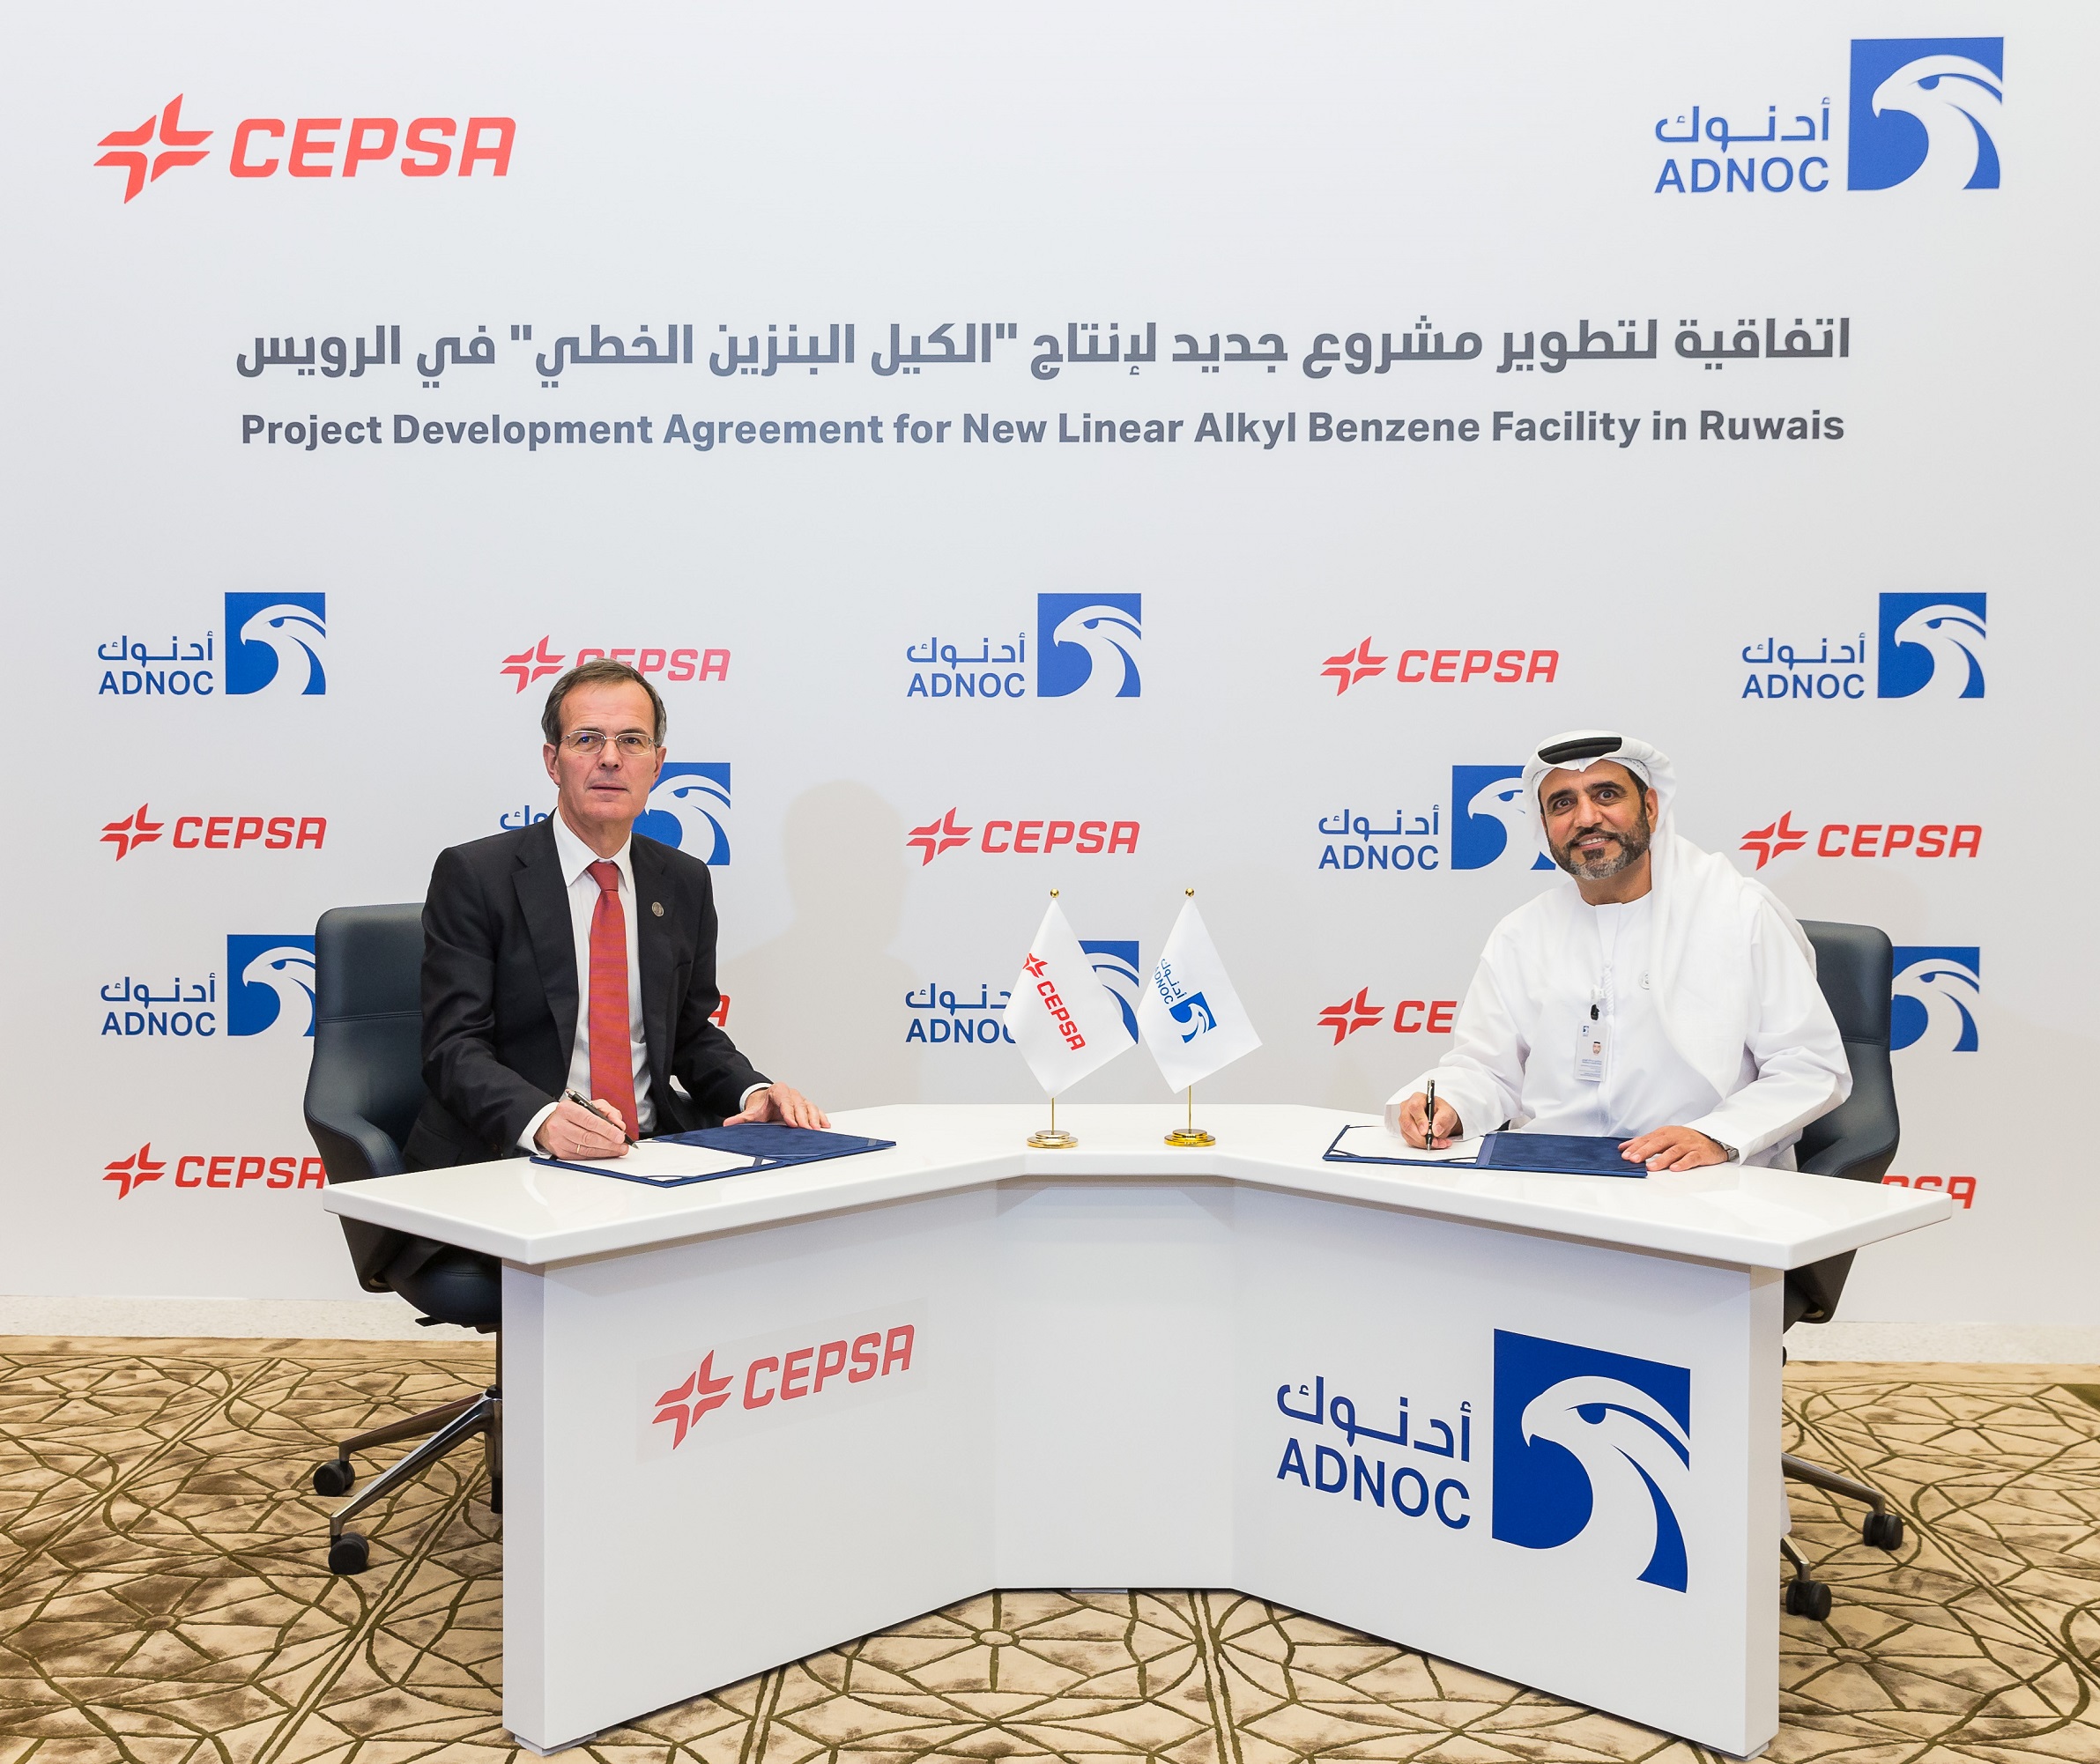 ADNOC And Cepsa Sign Project Development Agreement For New LAB Facility In Ruwais